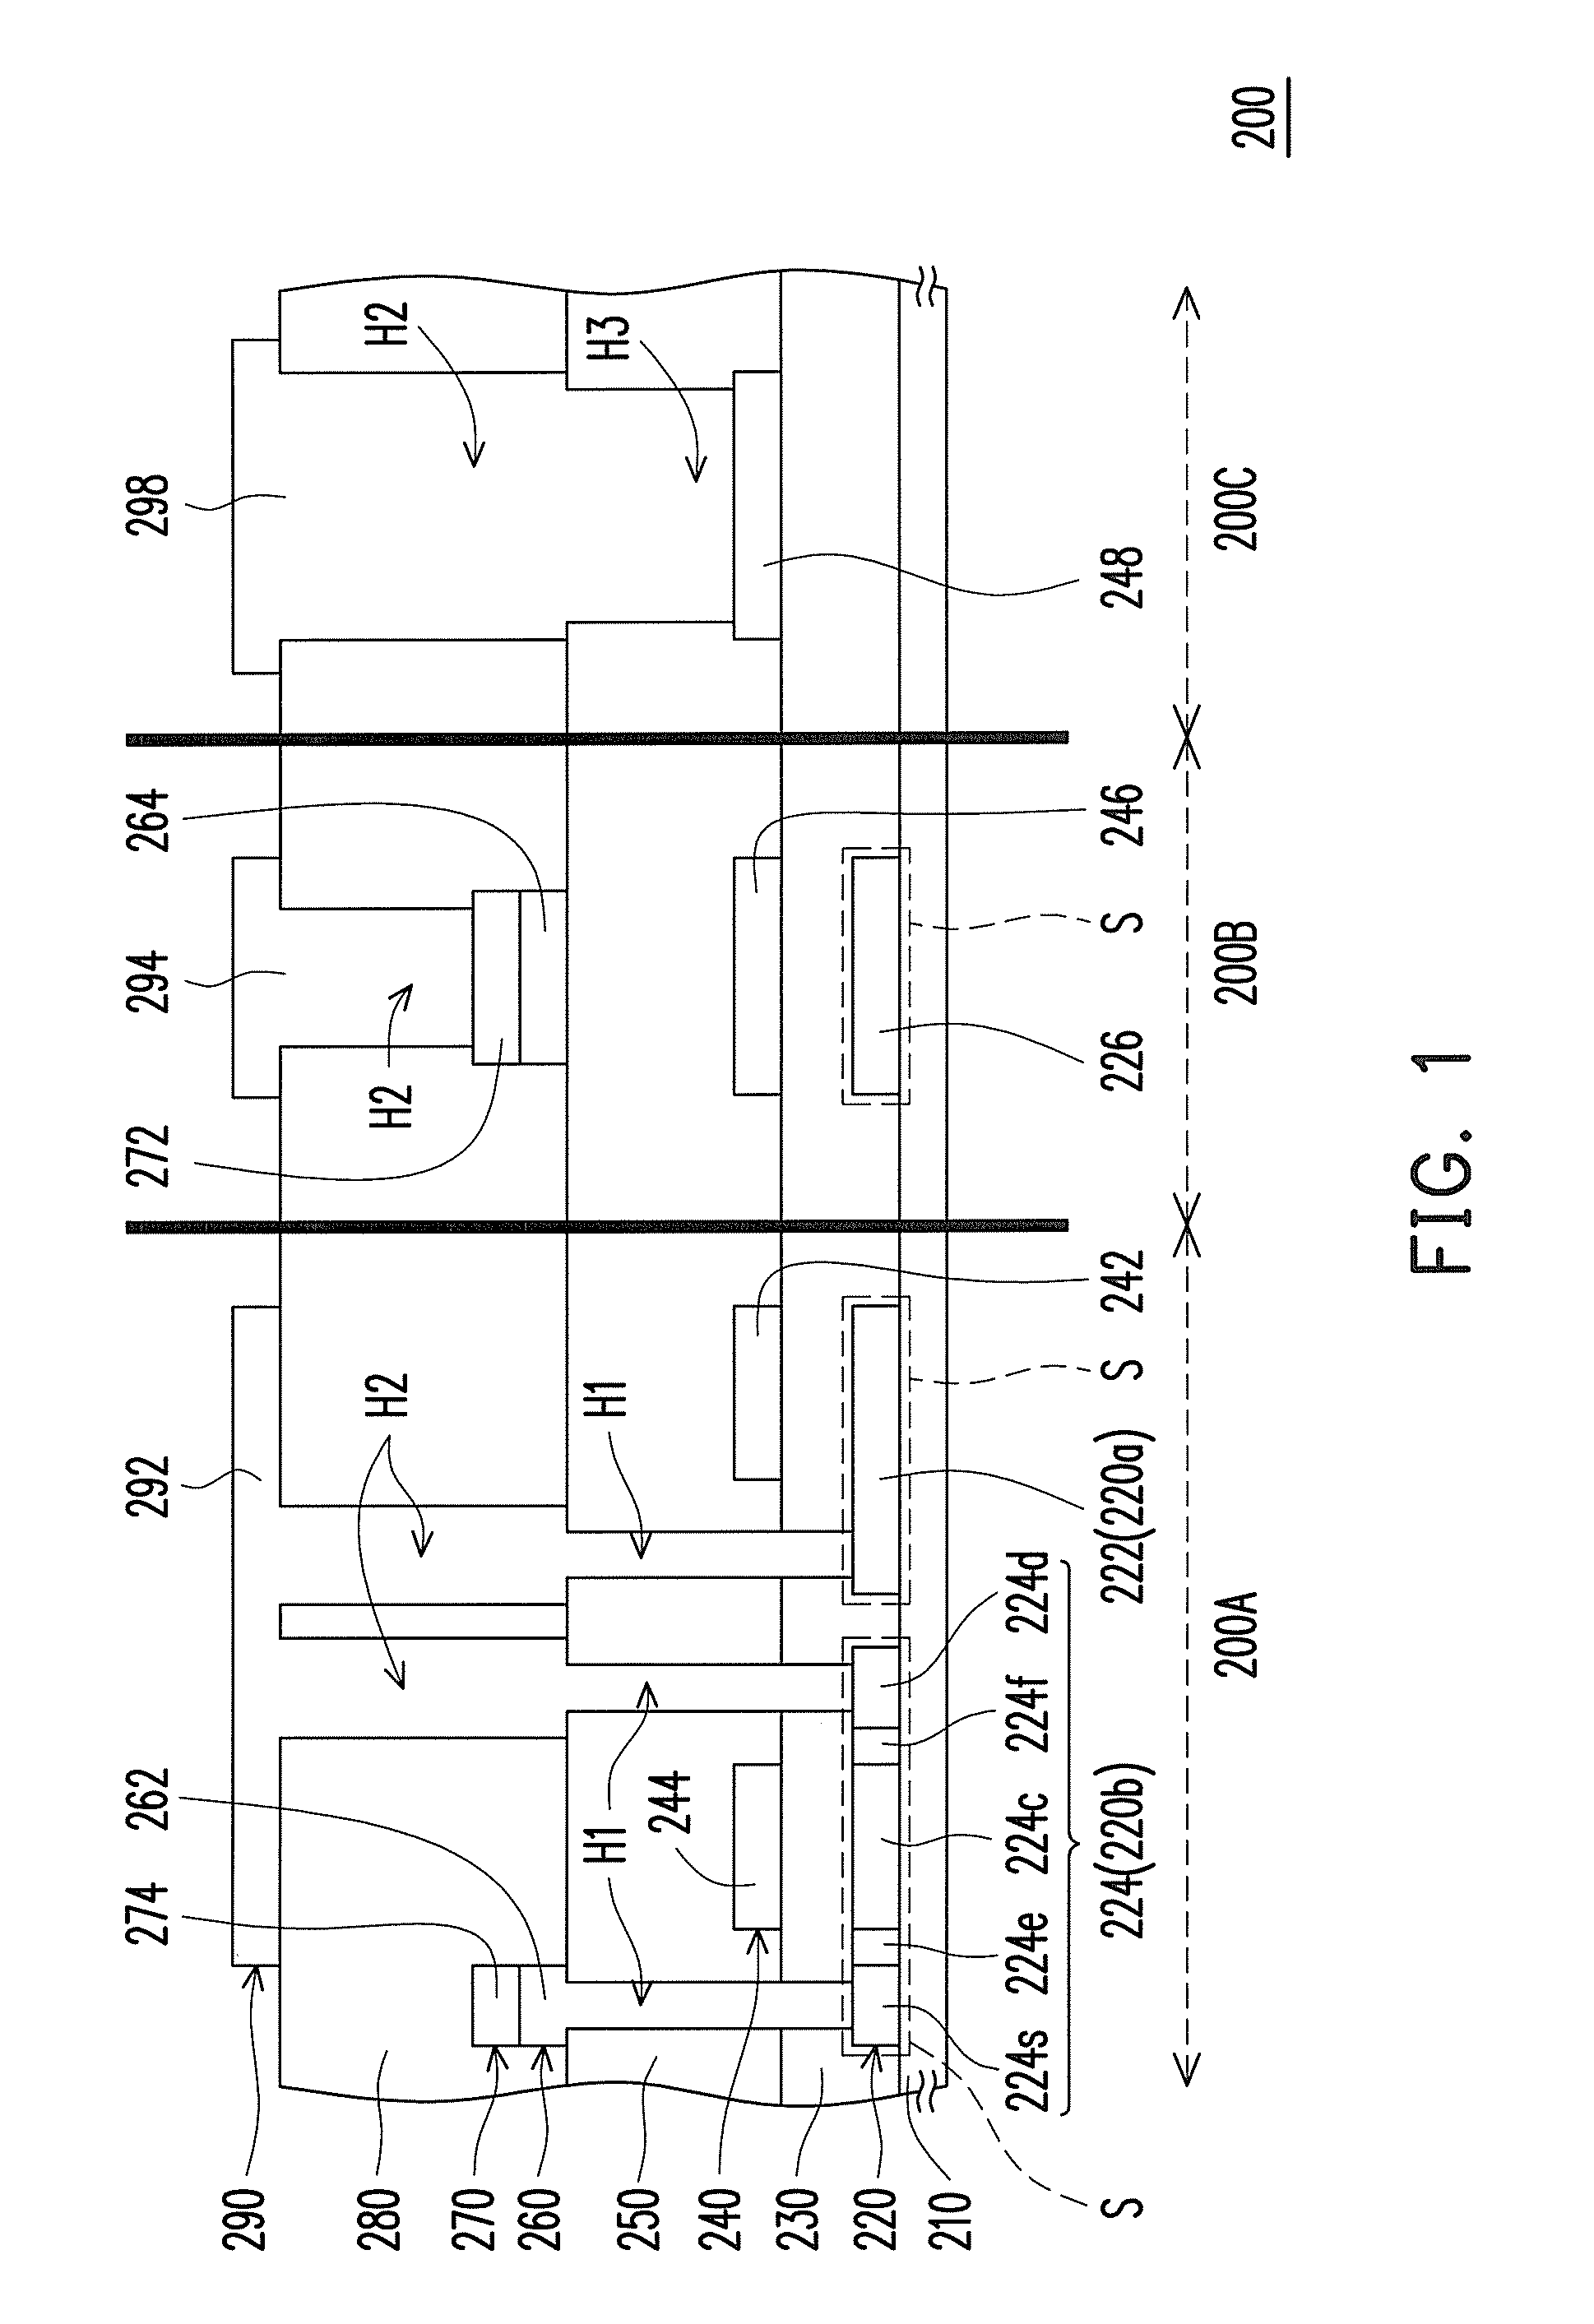 Active device array substrate and method for fabricating the same